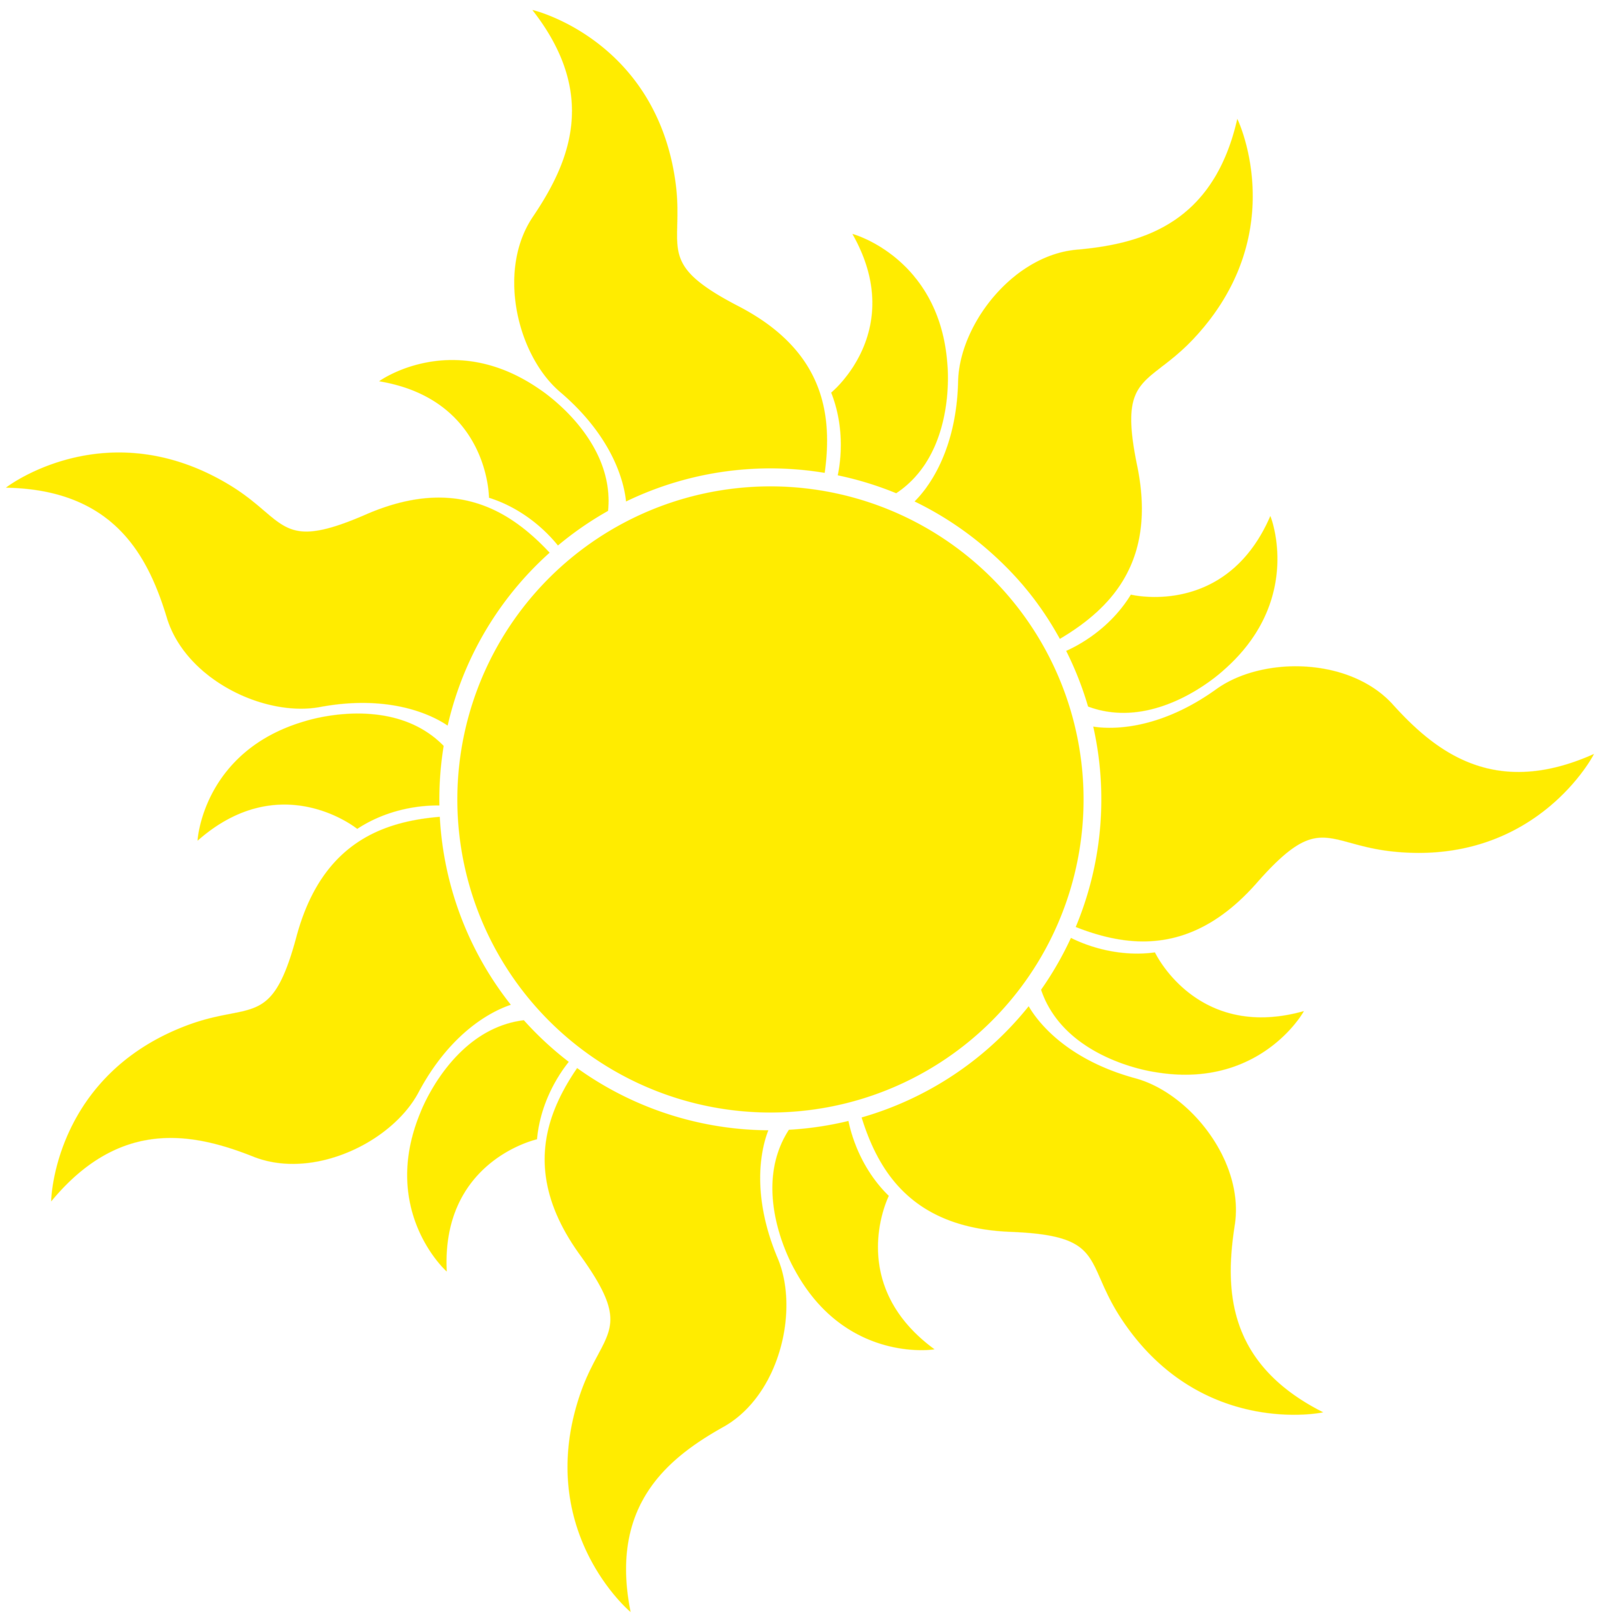 Clipart sun sweaty. Tangled maybe with the